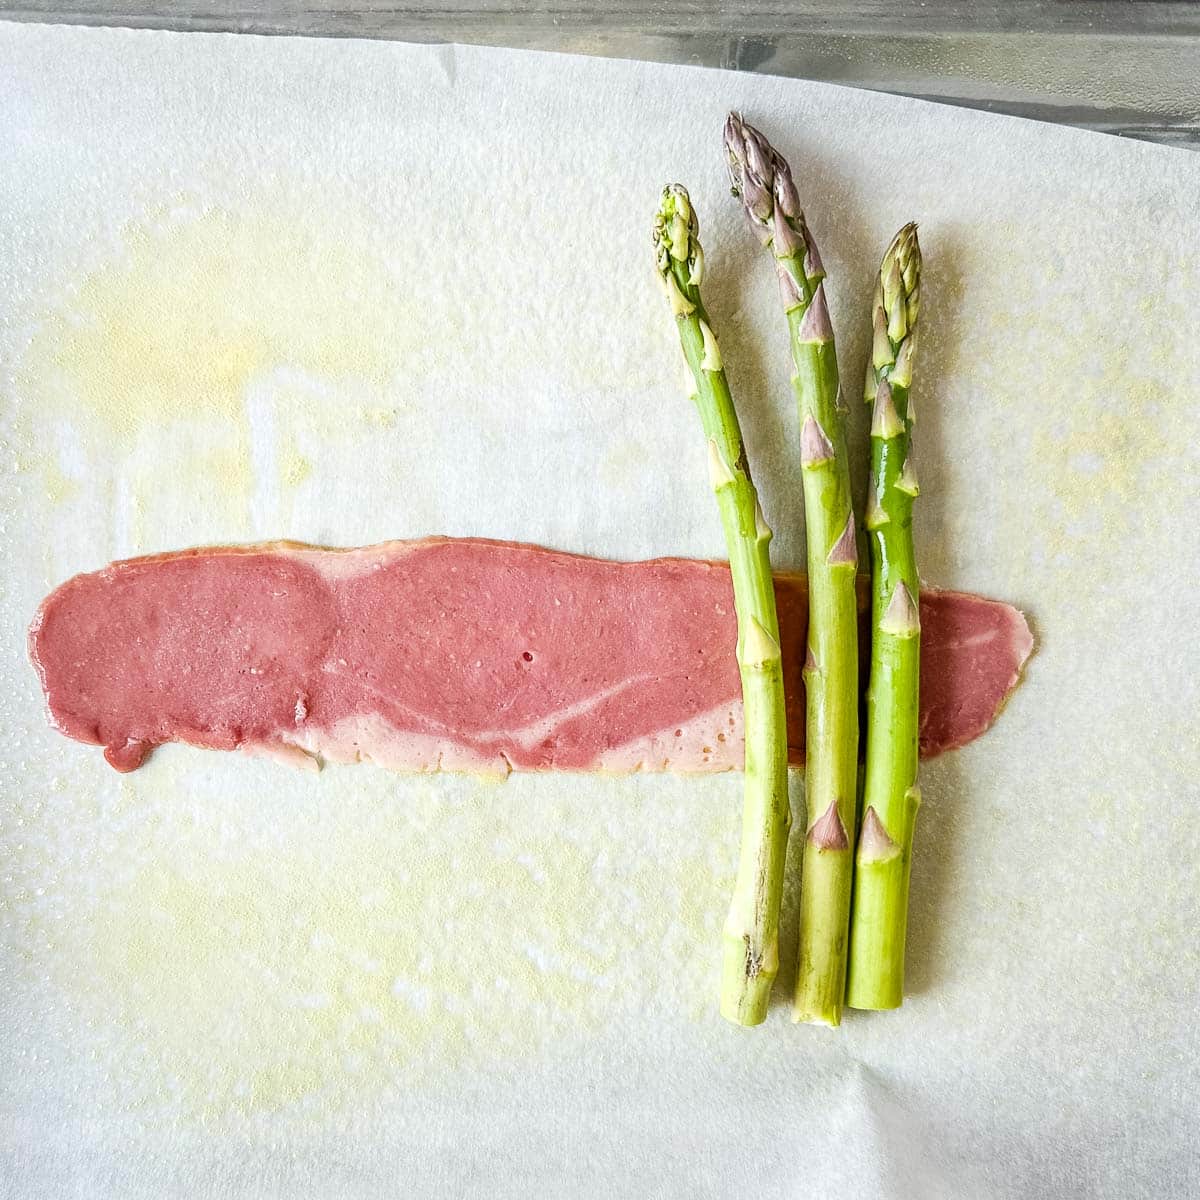 three asparagus spears sit crosswise on a trip of turkey bacon.